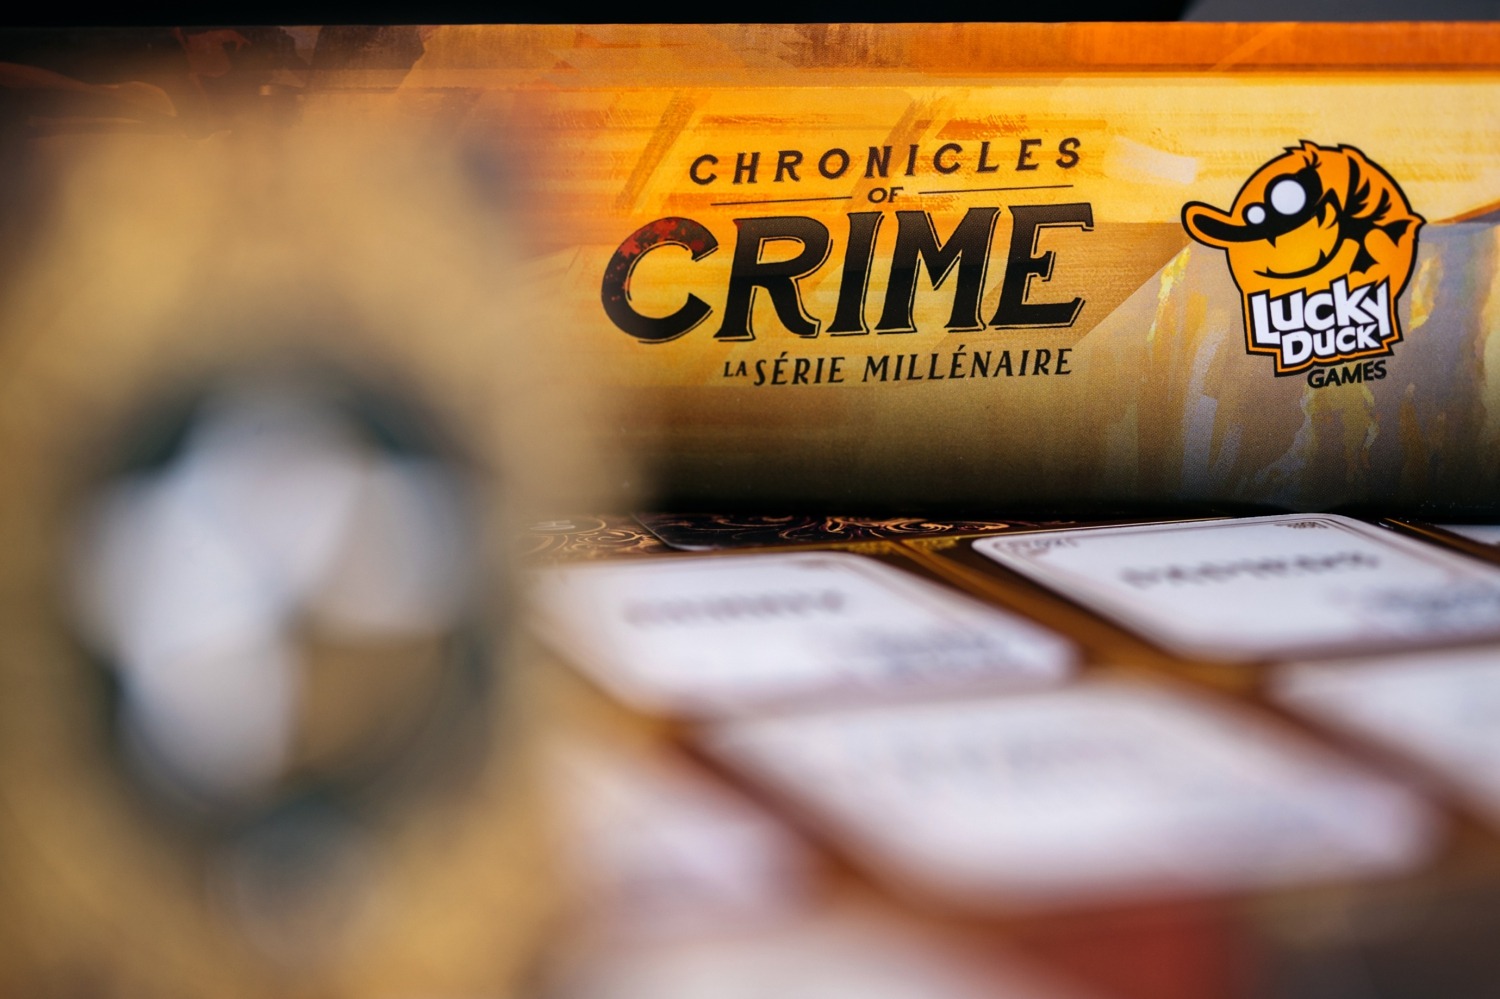 Chronicles of crime 1900 Millenium Lucky duck games boardgame 